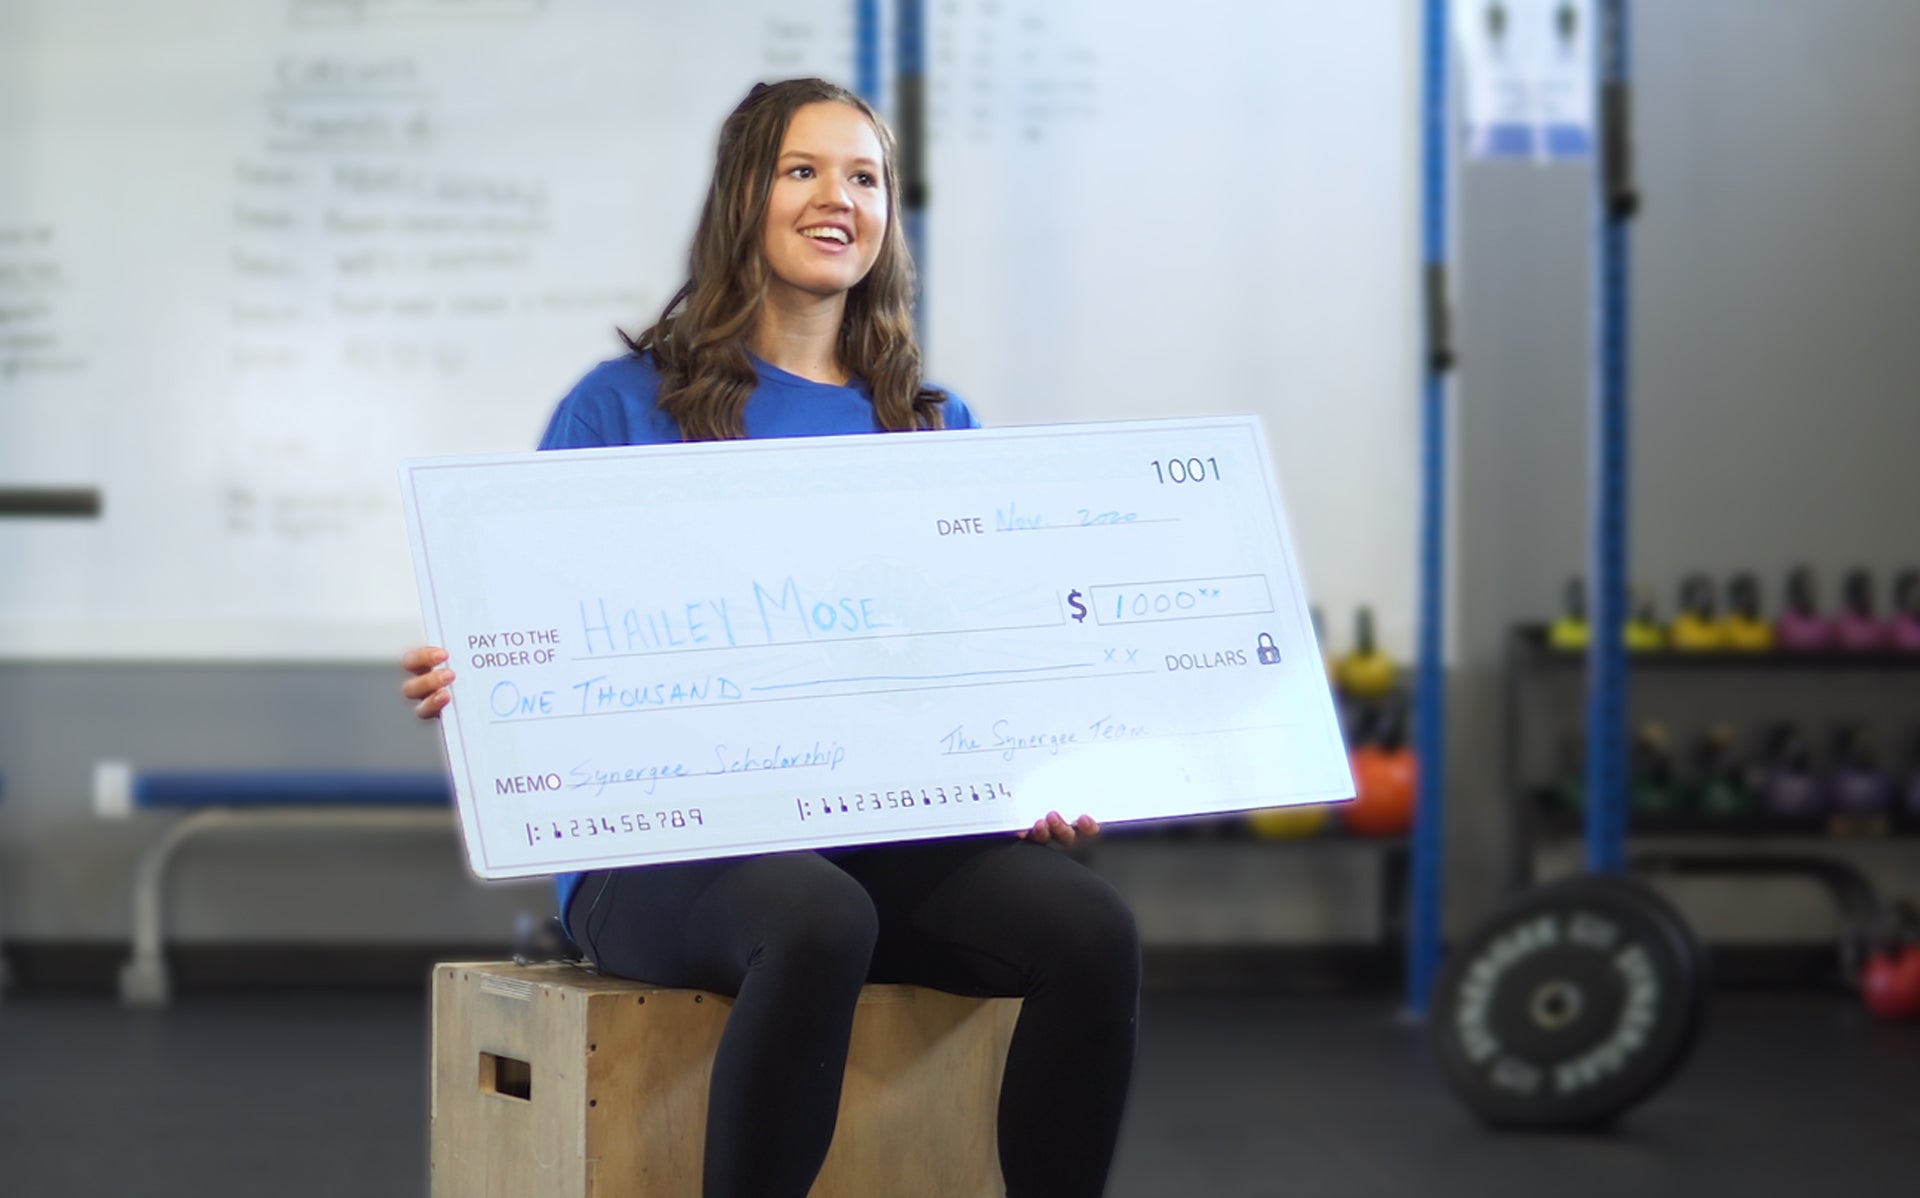 You Can Earn $1000 From Fitness: Even If You're Not A Pro!